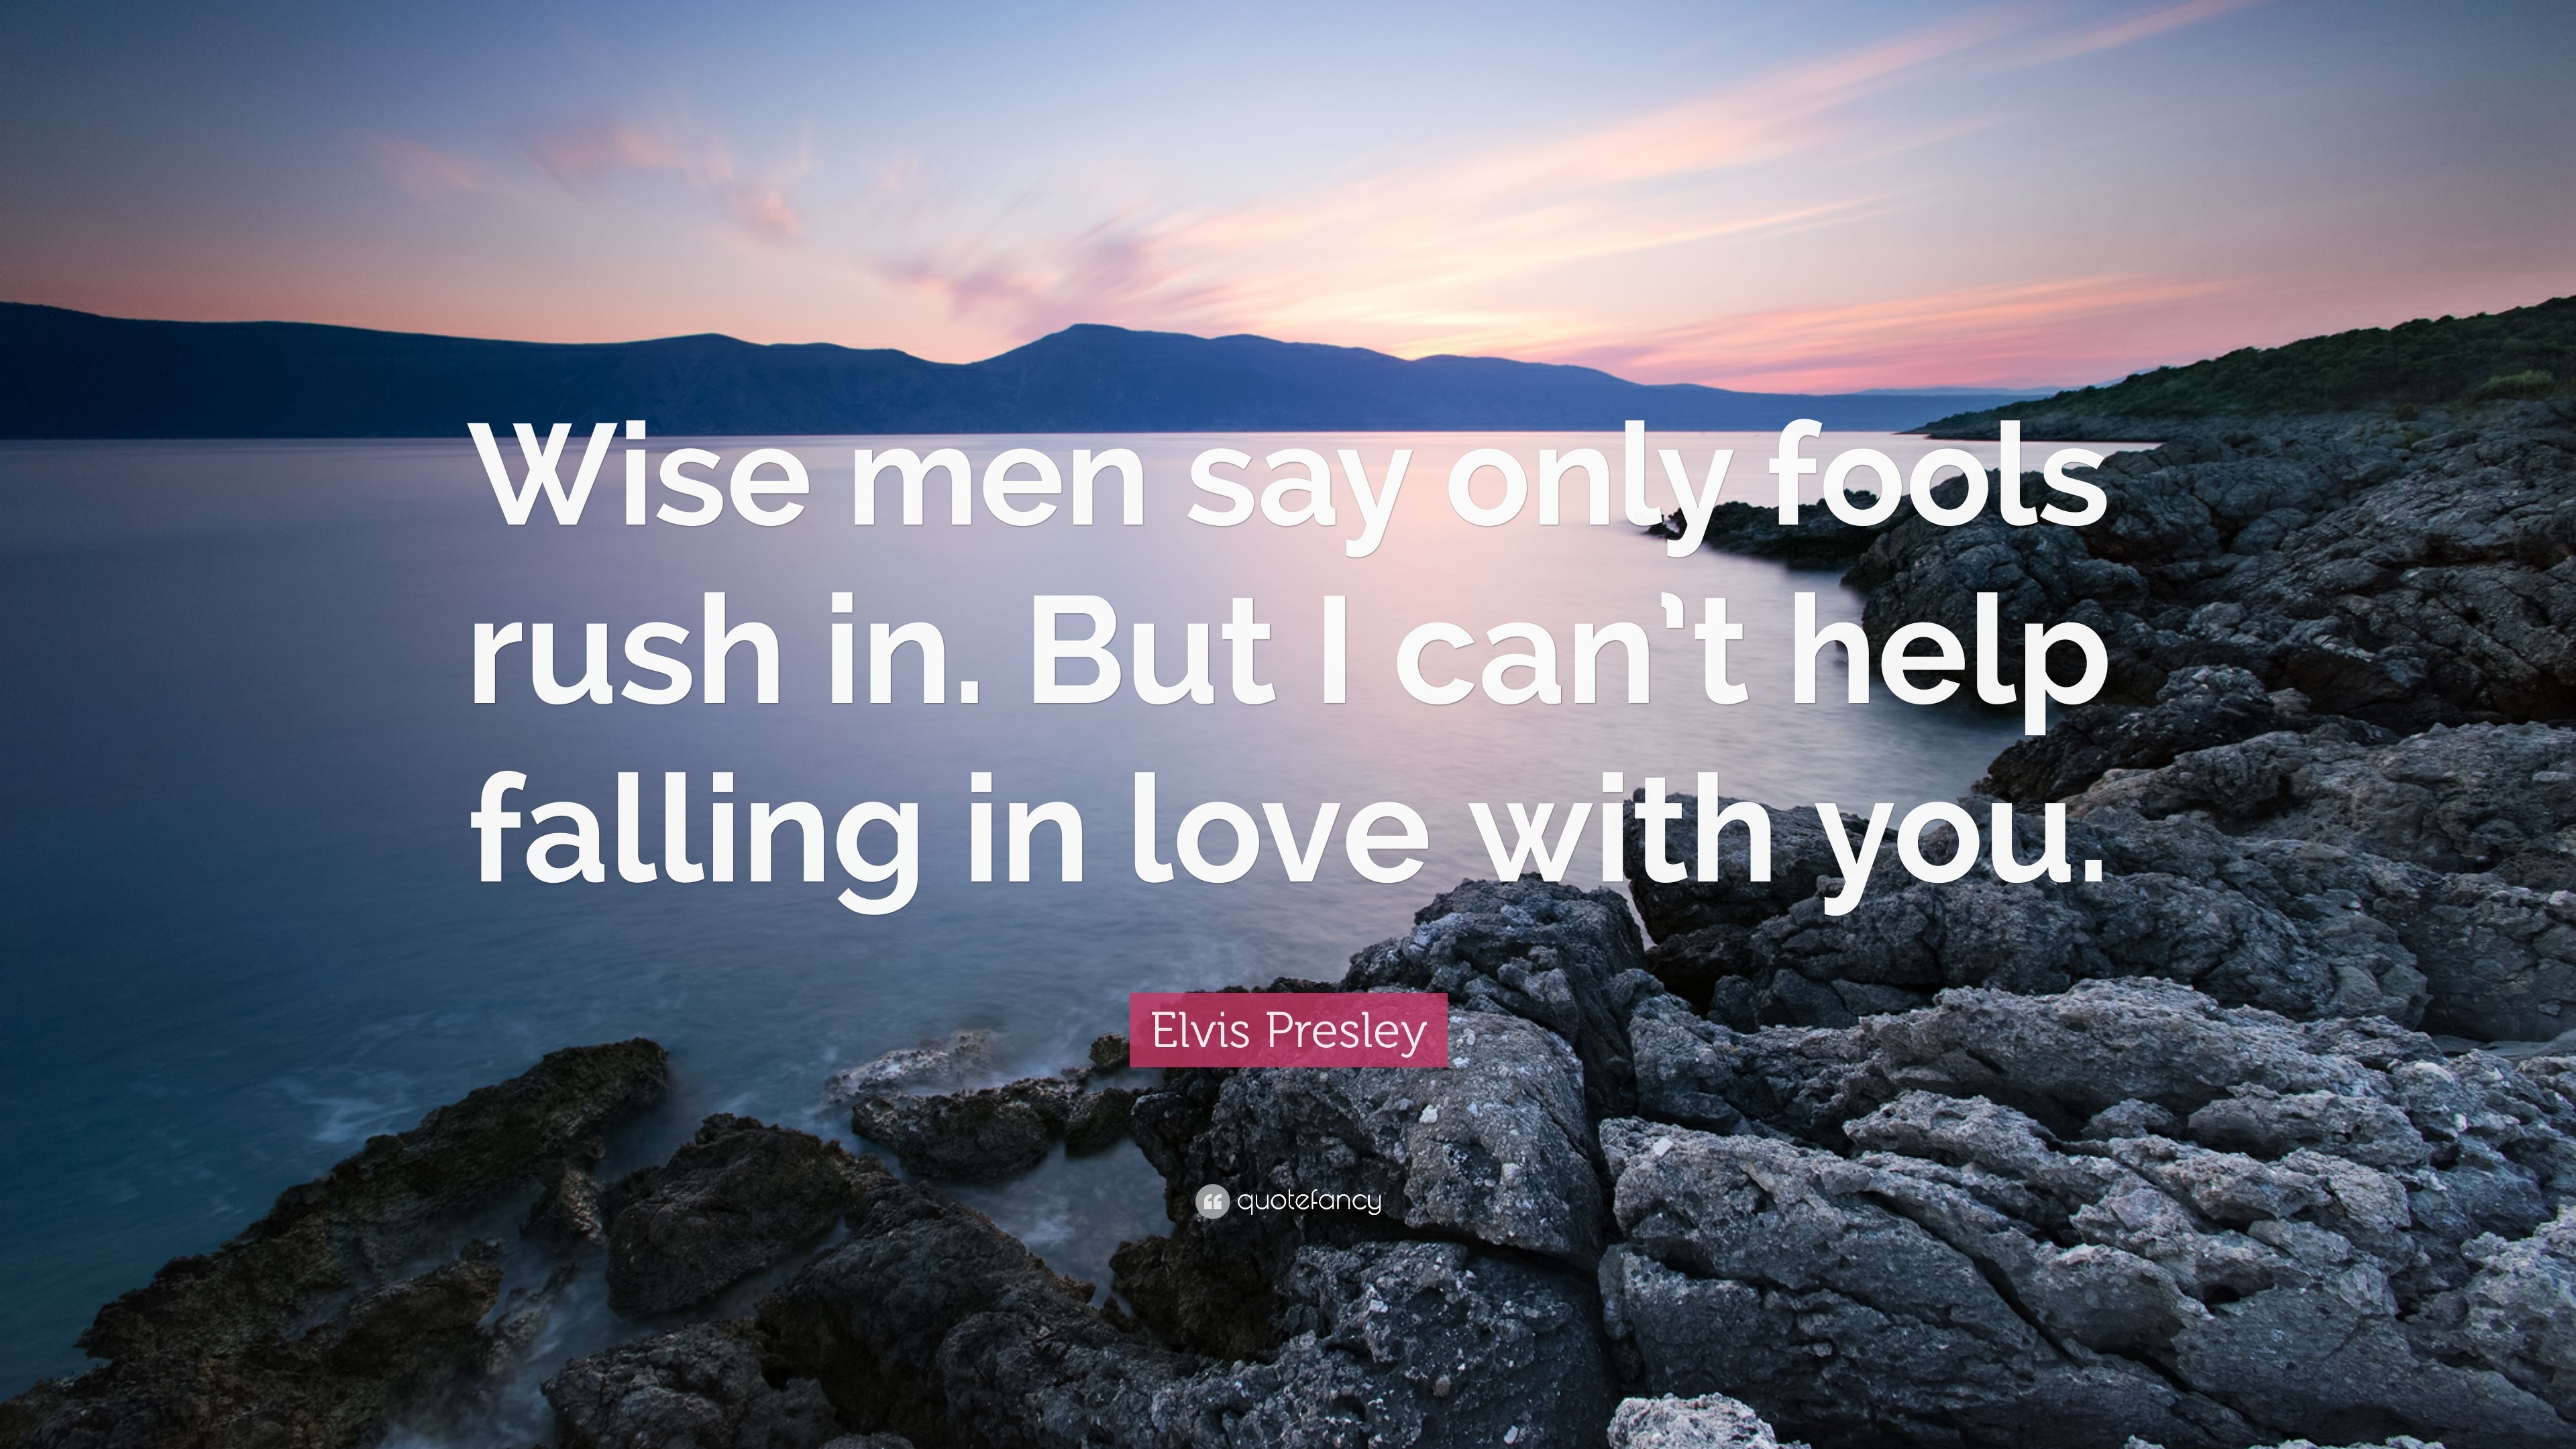 3840x2160 Elvis Presley Quote: “Wise men say only fools rush in. But I can